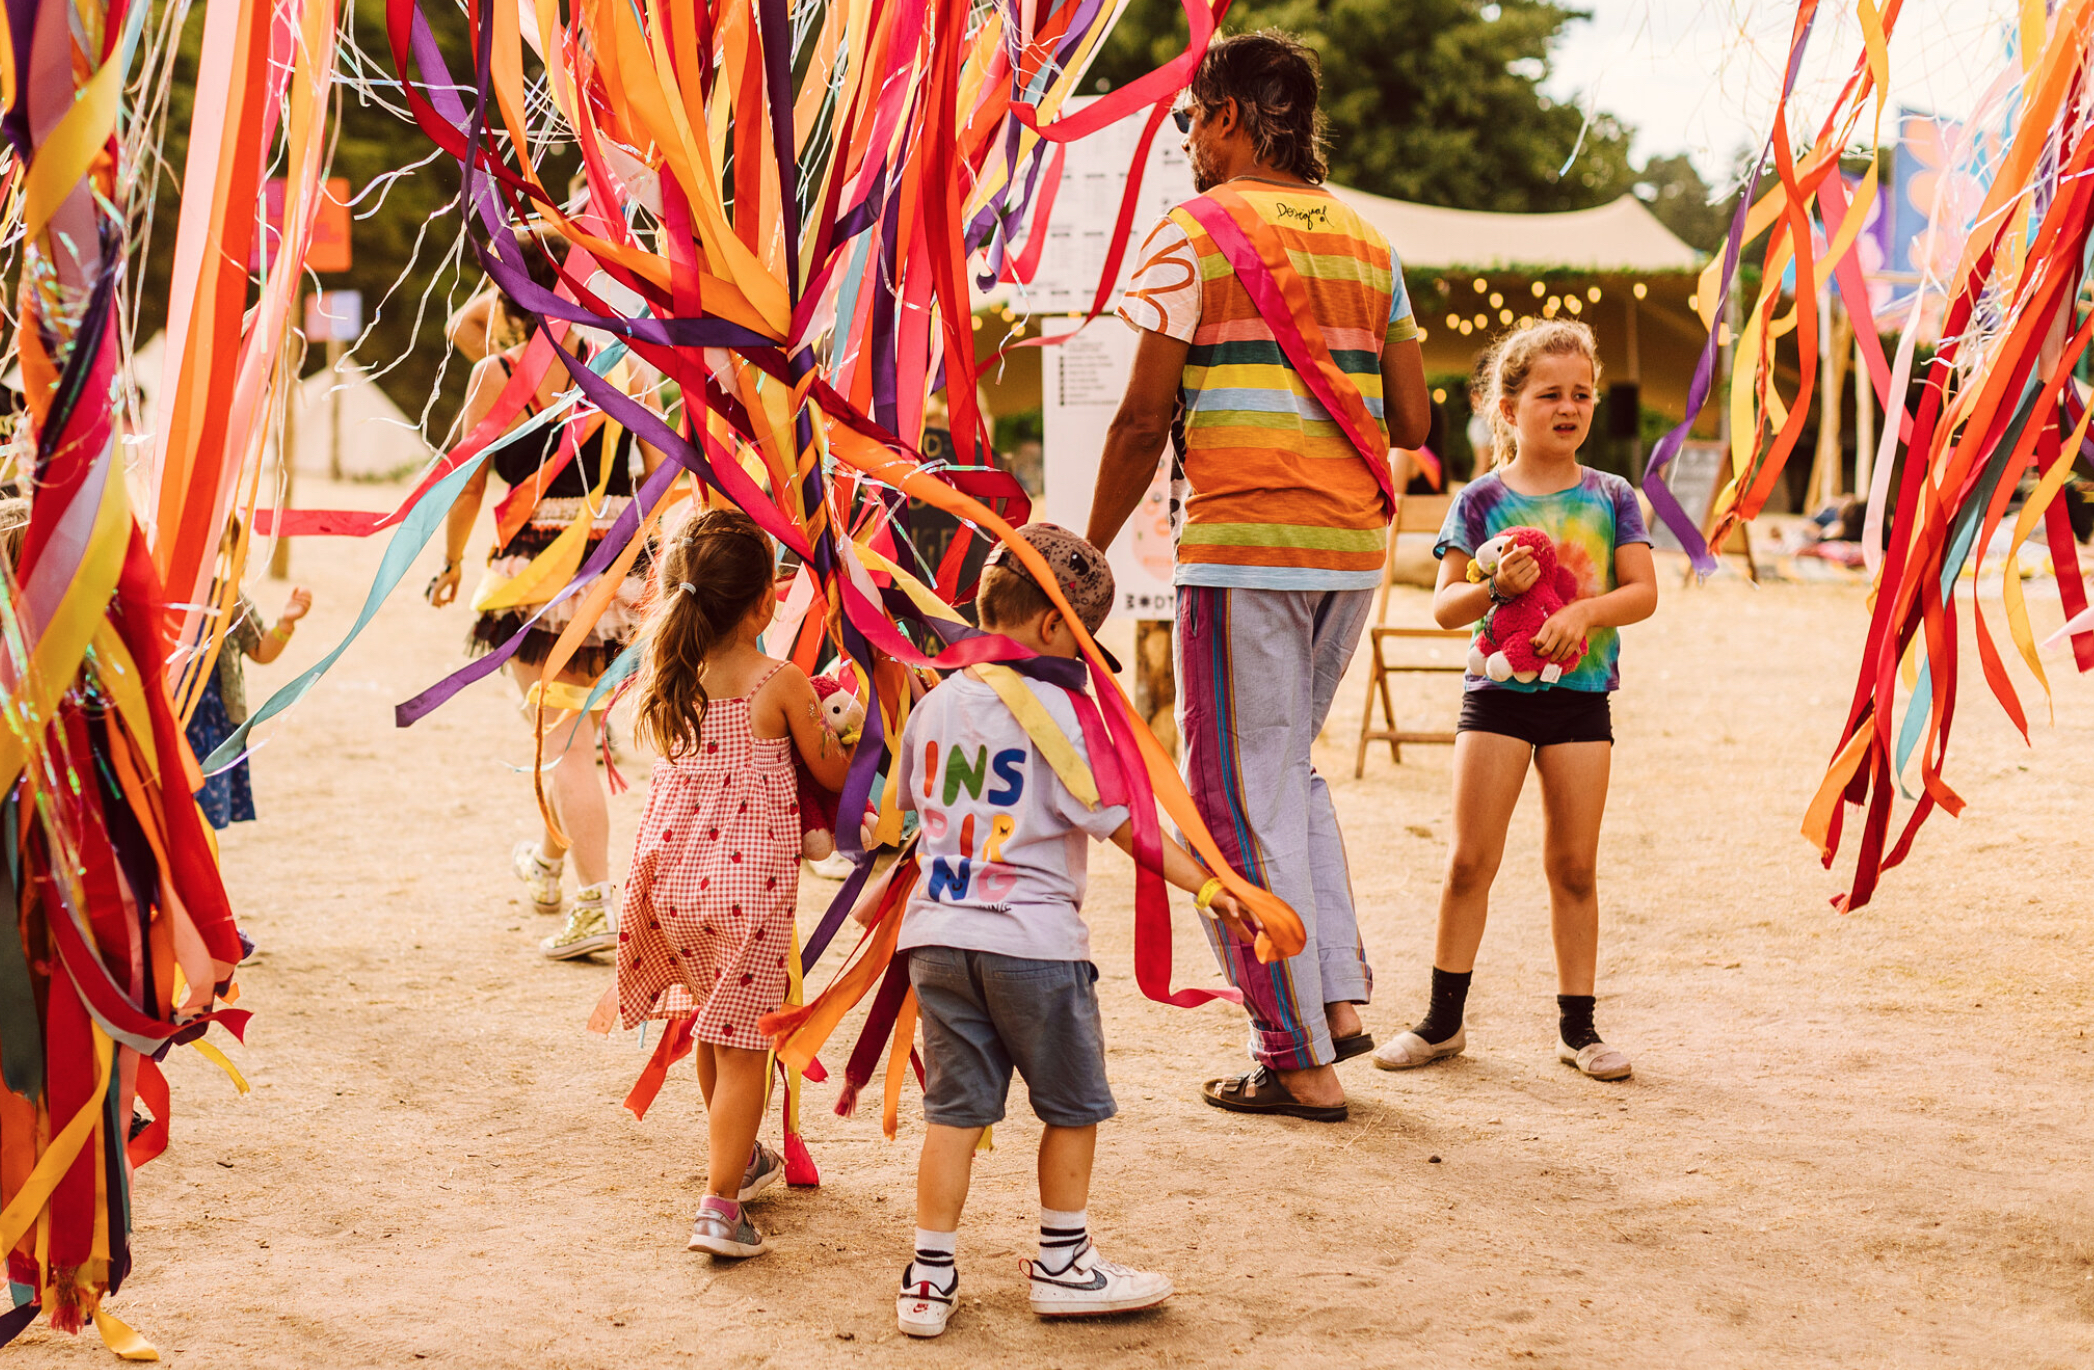 At Latitude Festival, there's a family camping area and plenty of activities in dedicated areas for kids